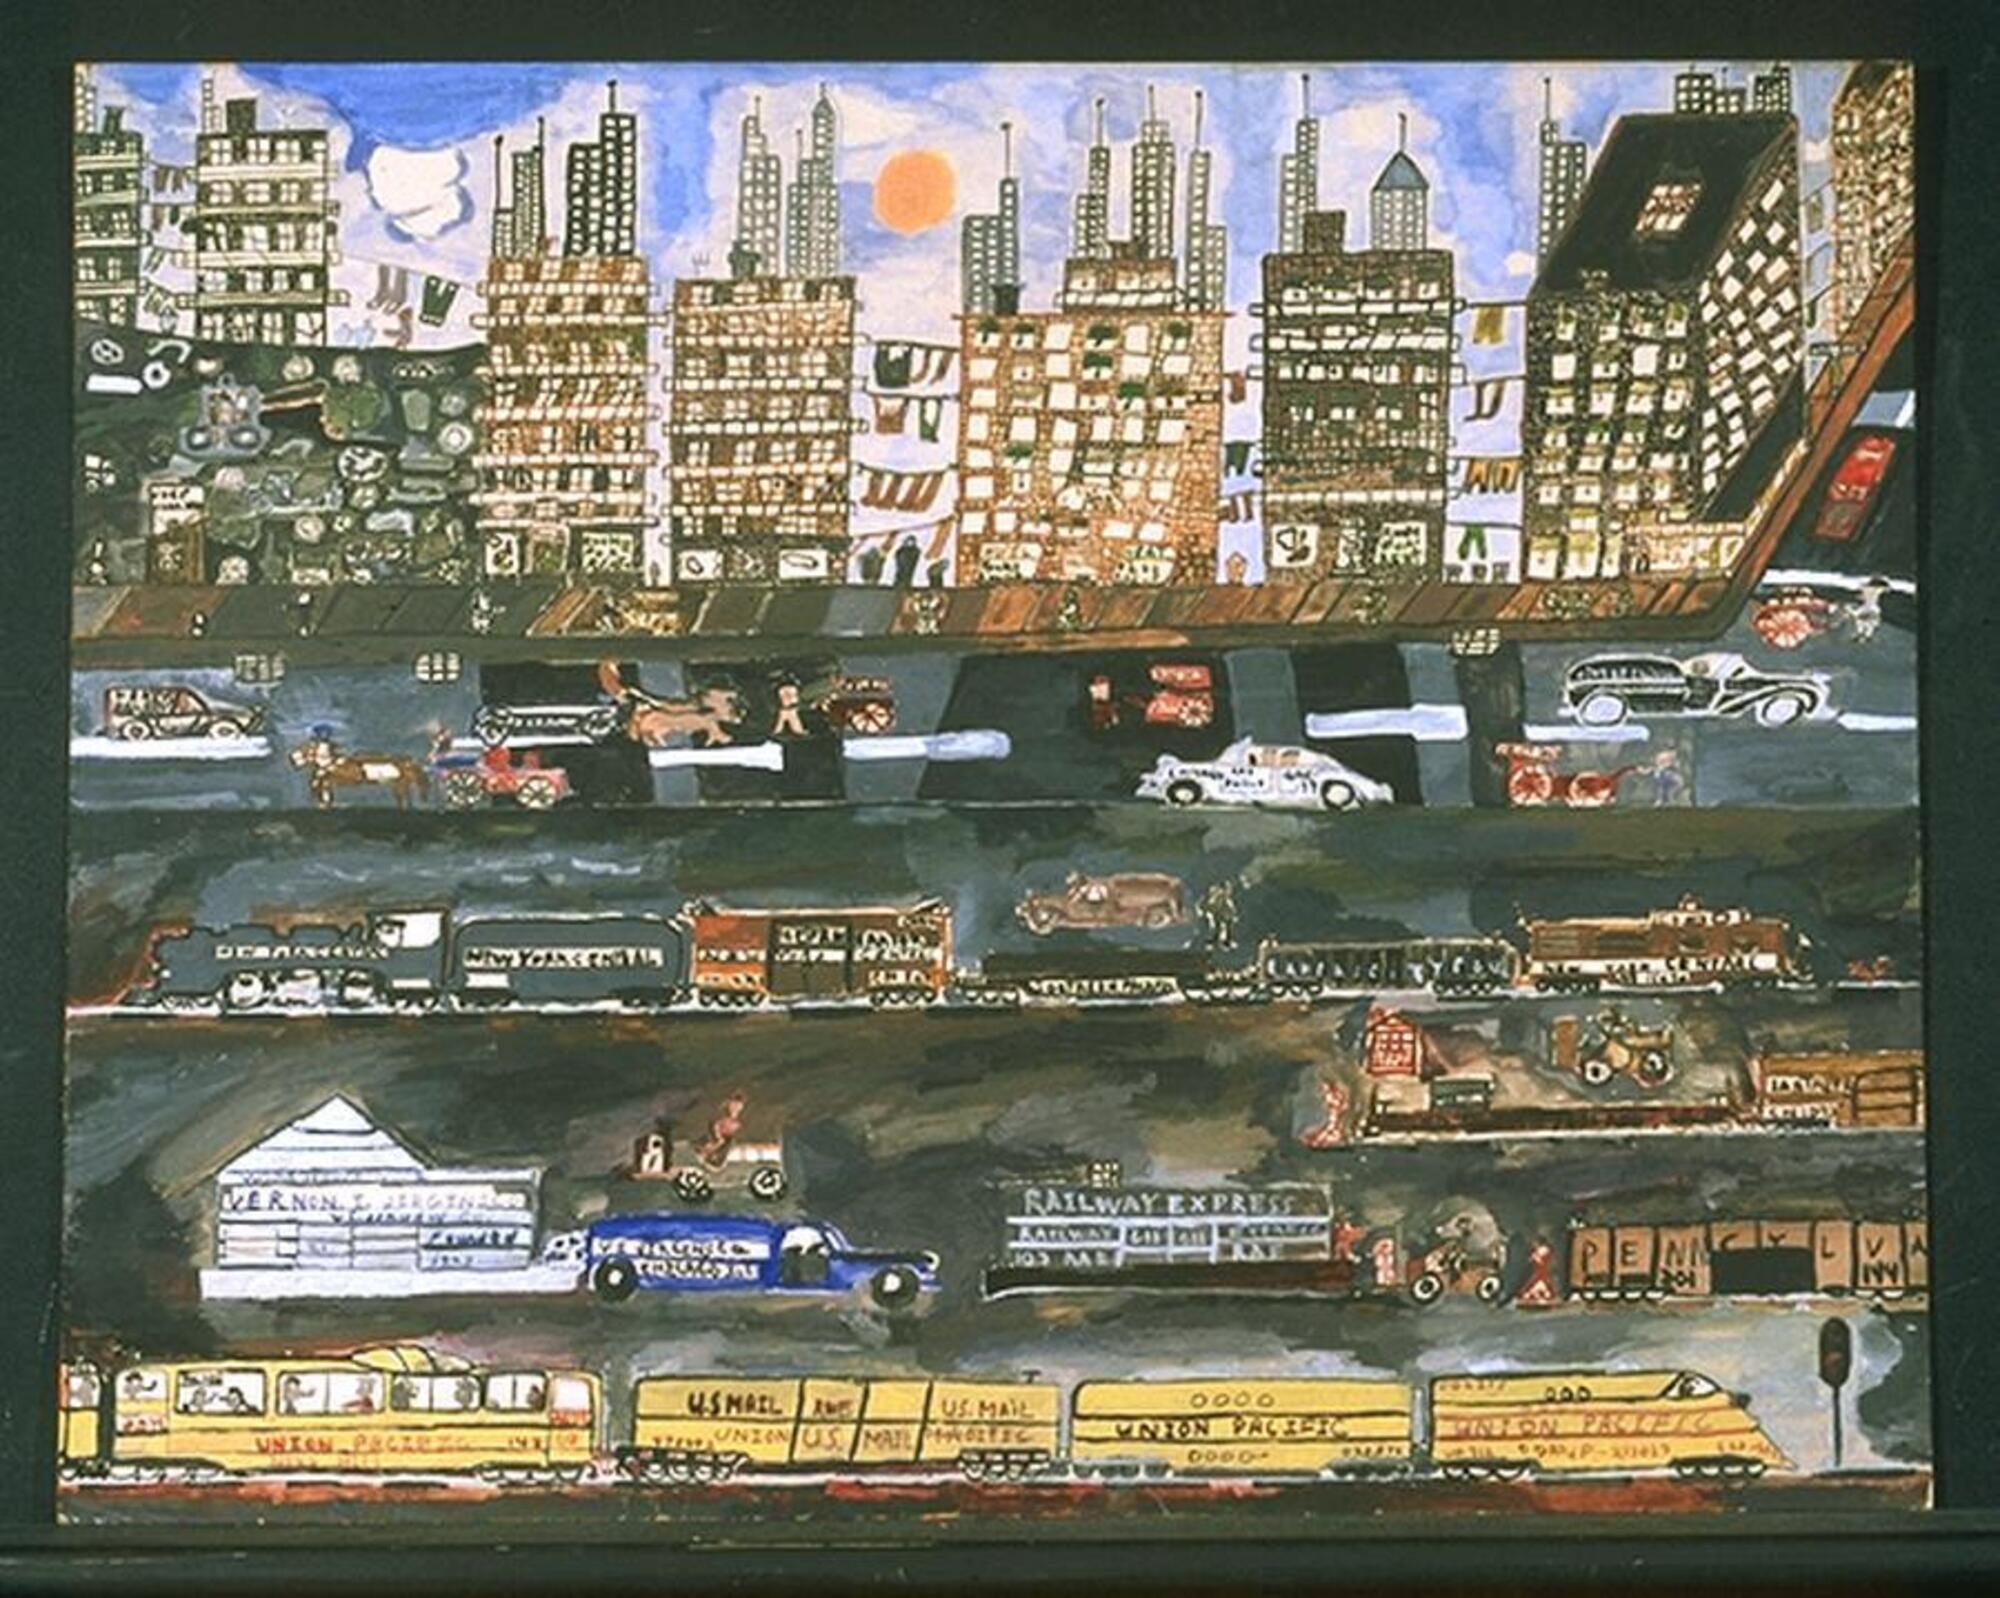 This colorful watercolor shows a crowded cityscape with streets appearing in consecutive horizontal bands, each with buildings or specific types of vehicles. High-rise buildings in the background and various smaller buildings, trains, and cars move along the streets in front. Clothes-lines hang between the buildings in the background. A yellow train passes in the foreground. The artists name appears on a white vehicle near the bottom left.